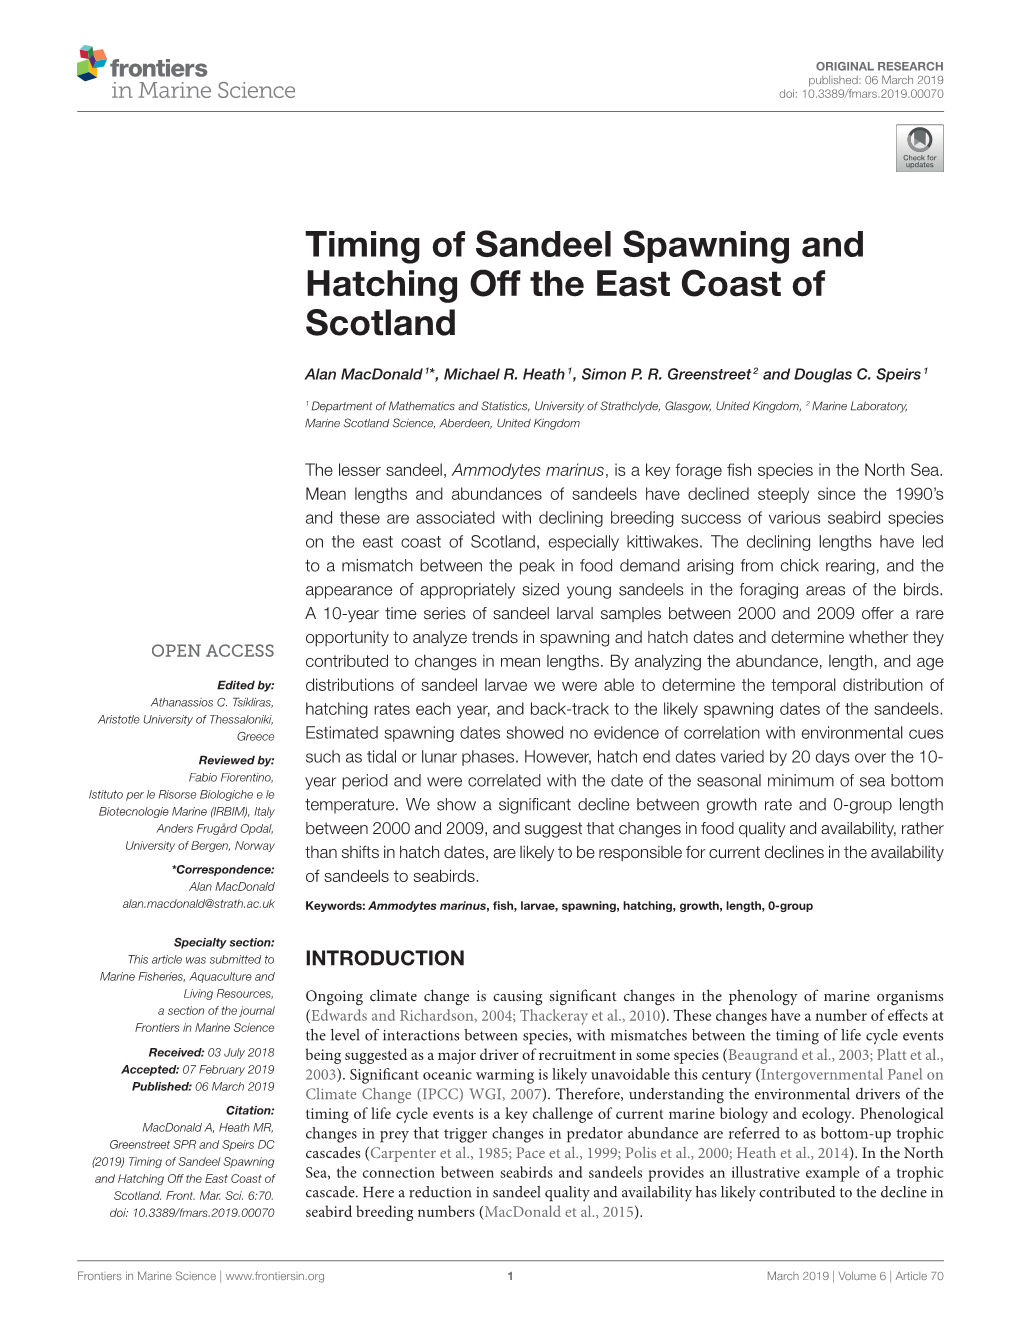 Timing of Sandeel Spawning and Hatching Off the East Coast of Scotland